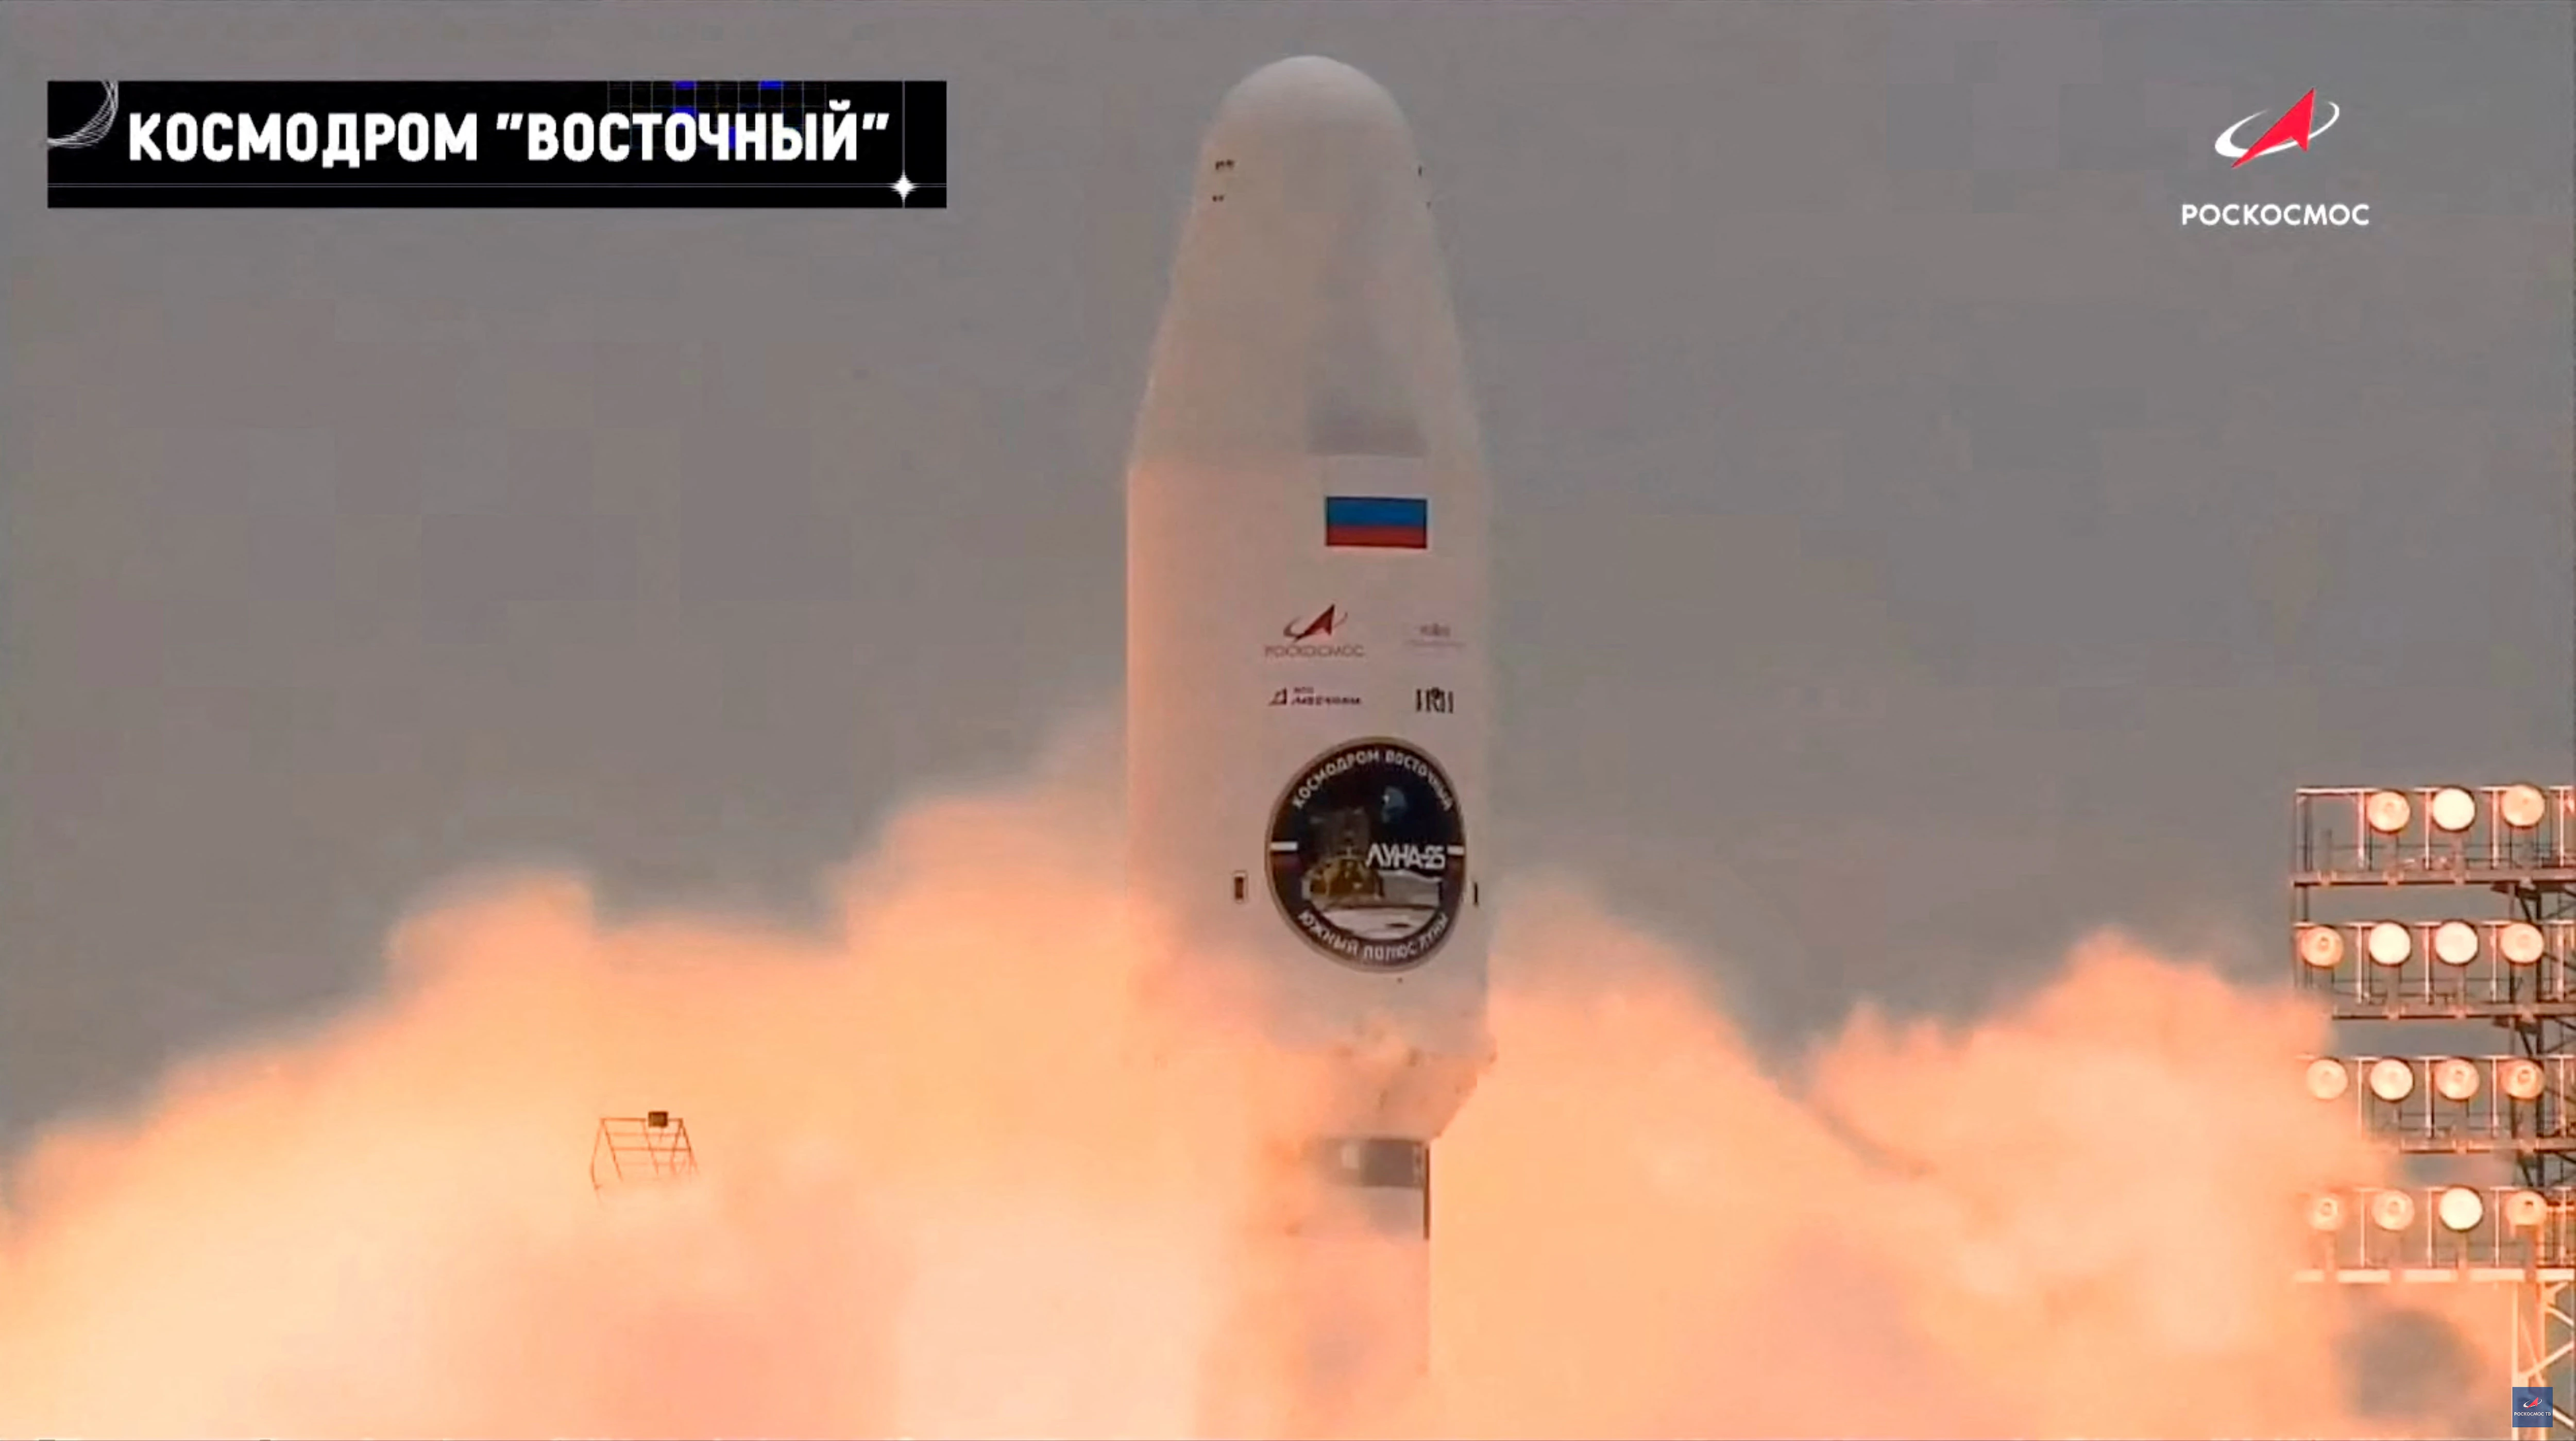 After almost half a century, Russia has successfully launched a spacecraft that aims to return to the moon